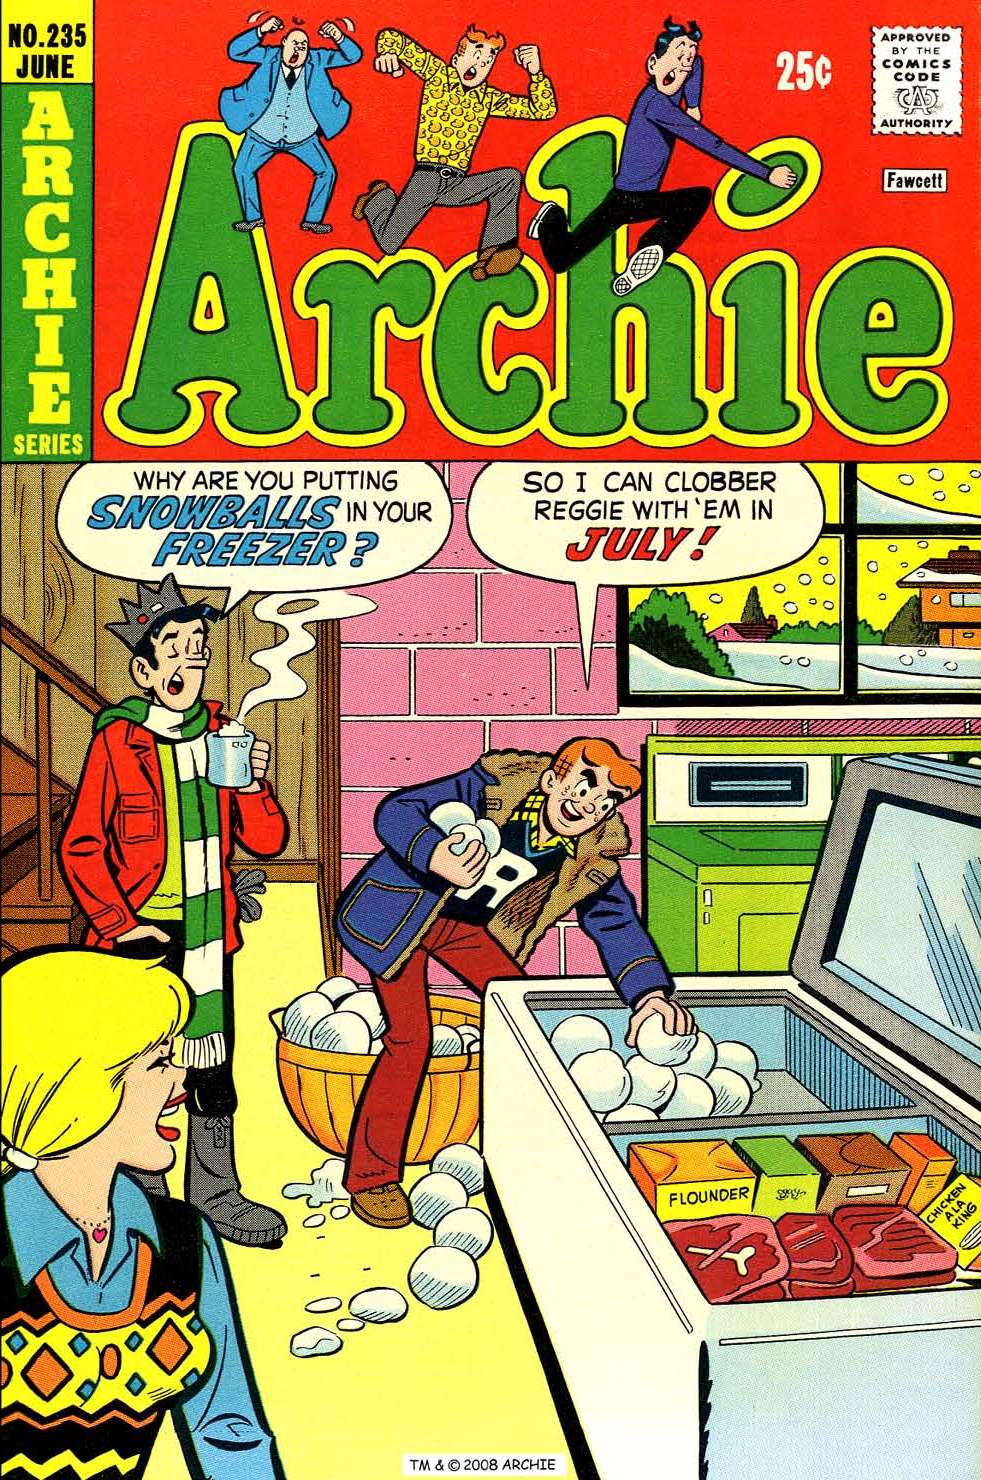 Read online Archie (1960) comic -  Issue #235 - 1